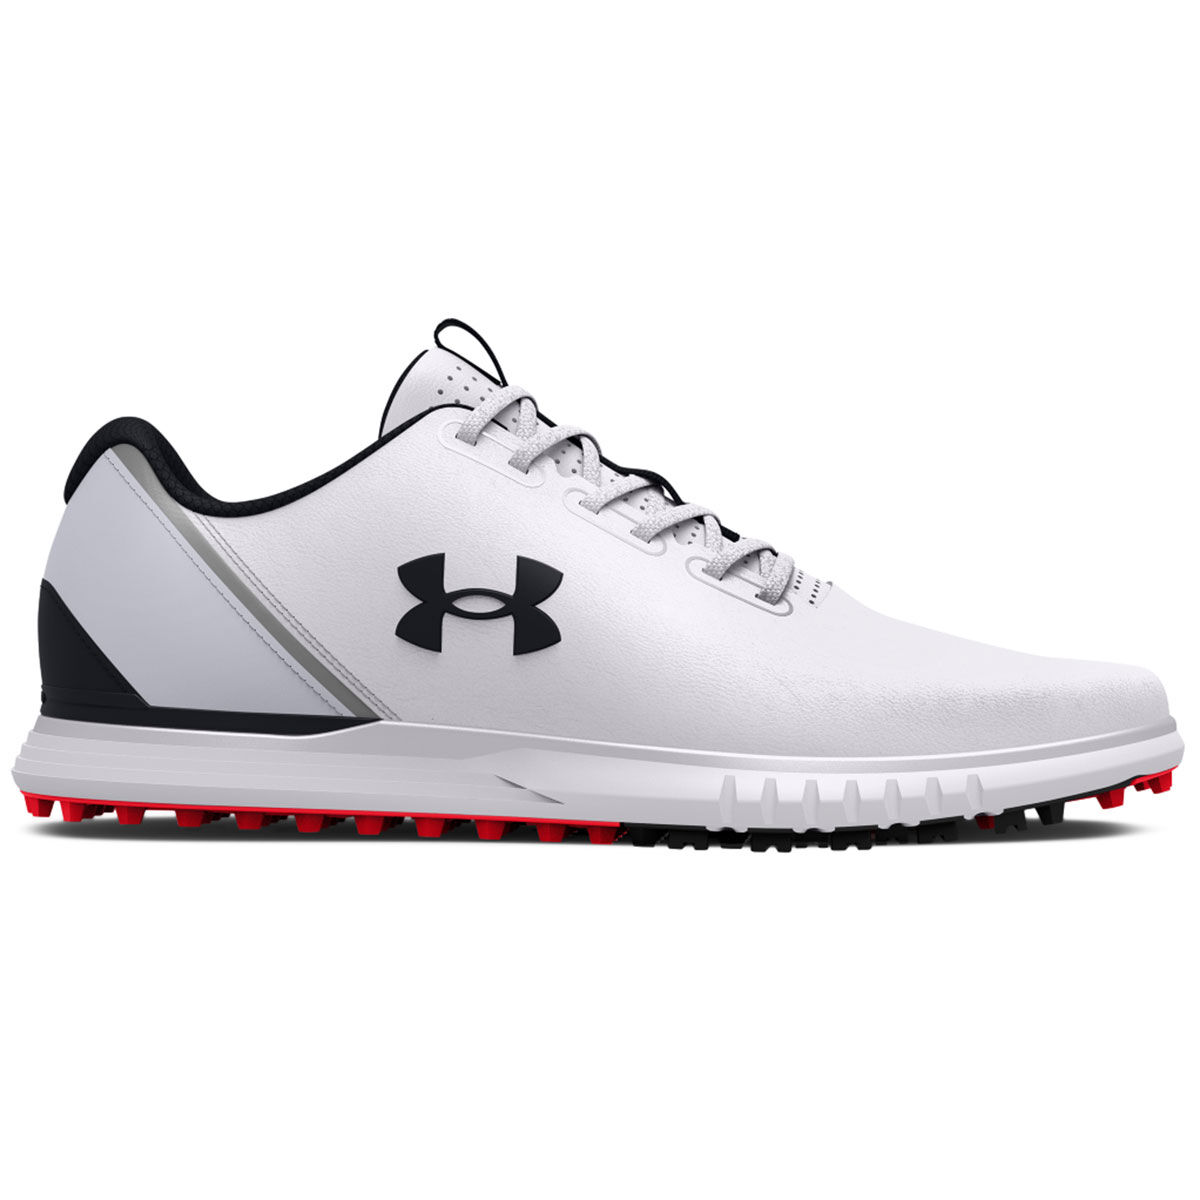 Under Armour Men’s Medal Waterproof Spikeless Golf Shoes, Mens, White/grey/black, 7 | American Golf